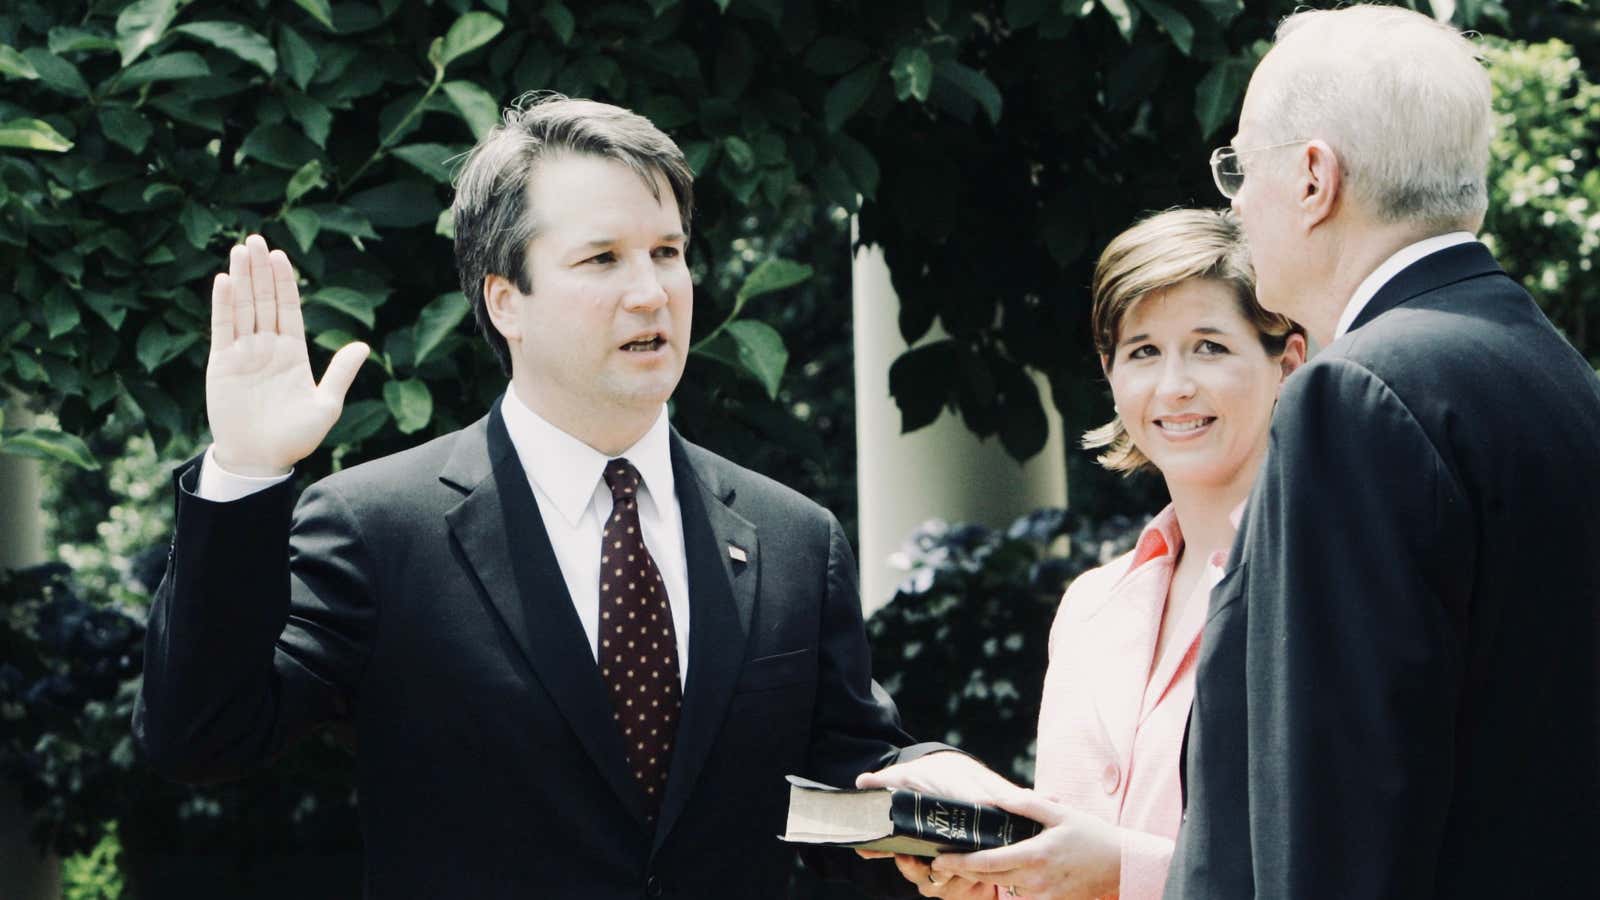 Brett Kavanaugh, swearing to uphold the law.